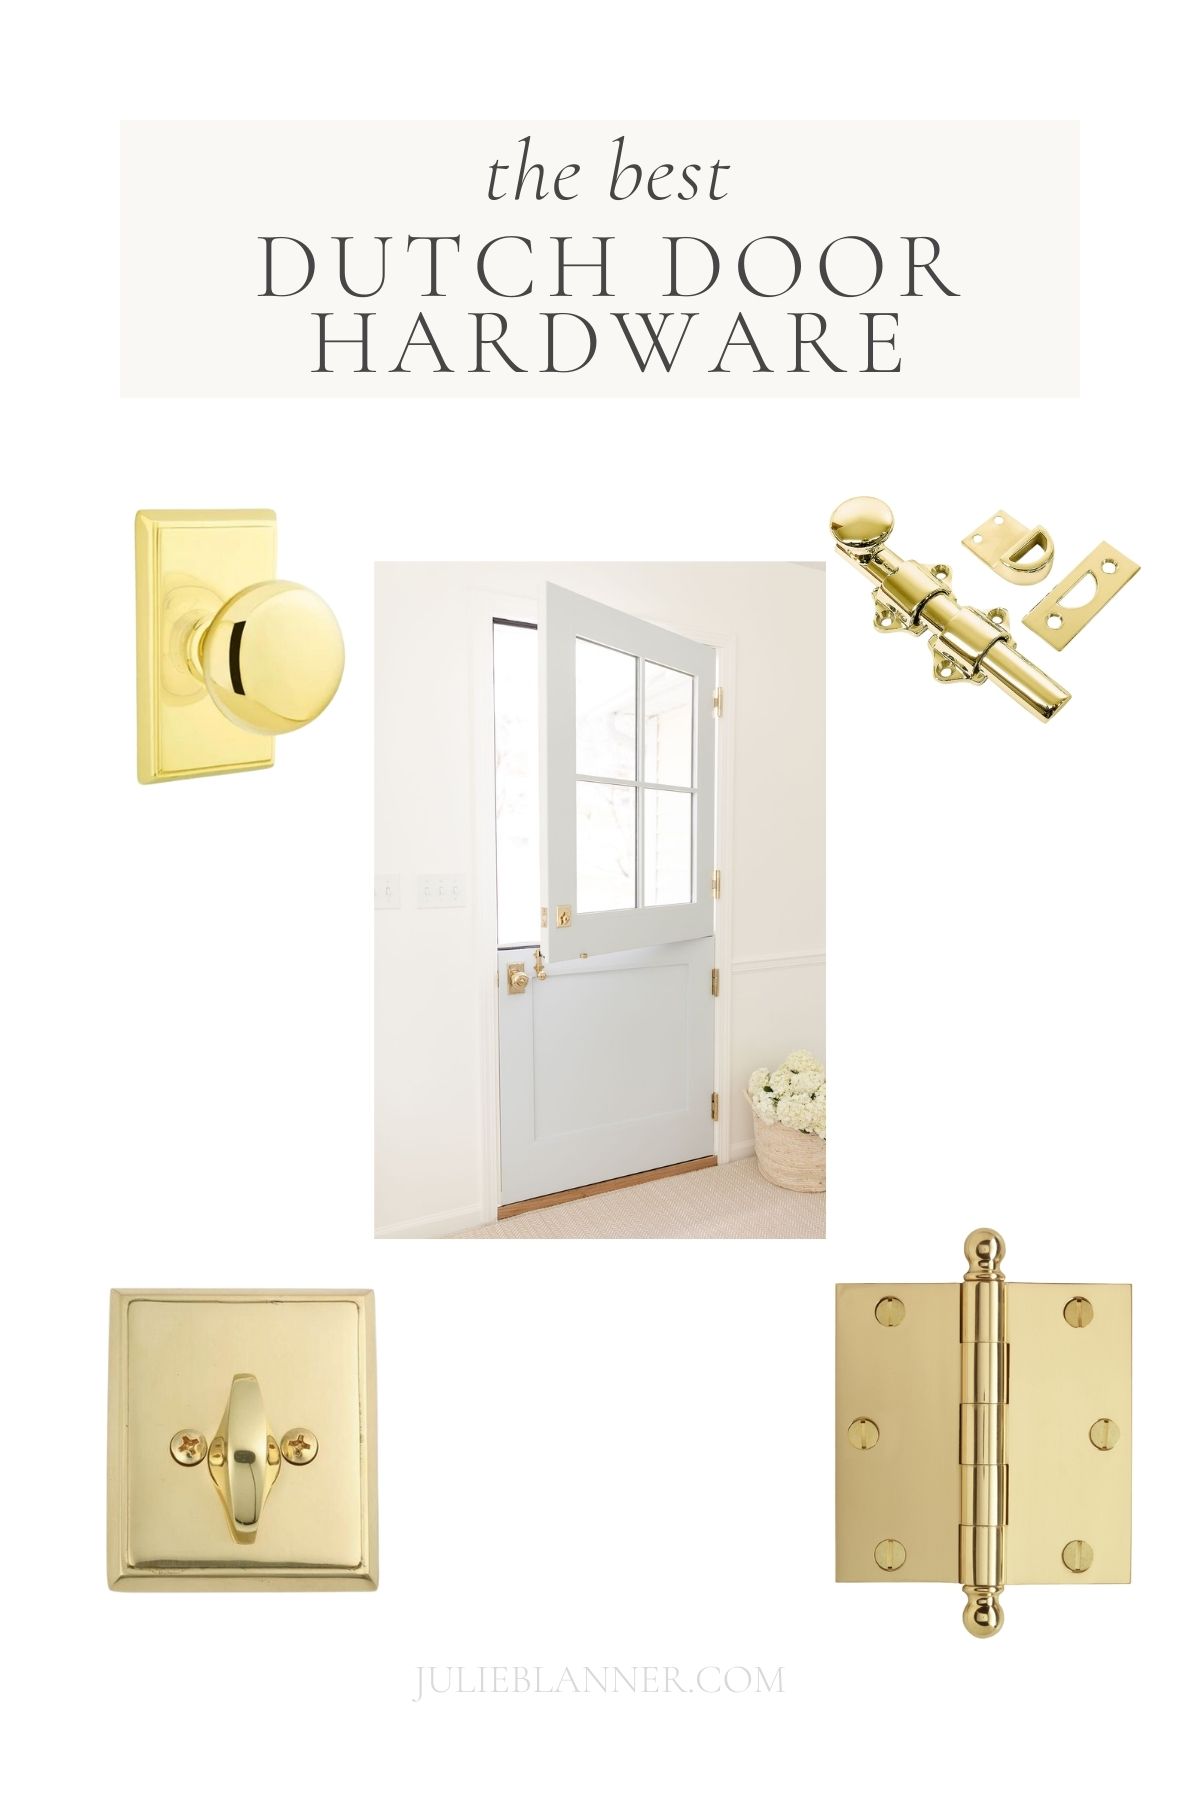 A graphic with the title of "the best Dutch Door Hardware" and several images of brass hardware surrounding a blue door